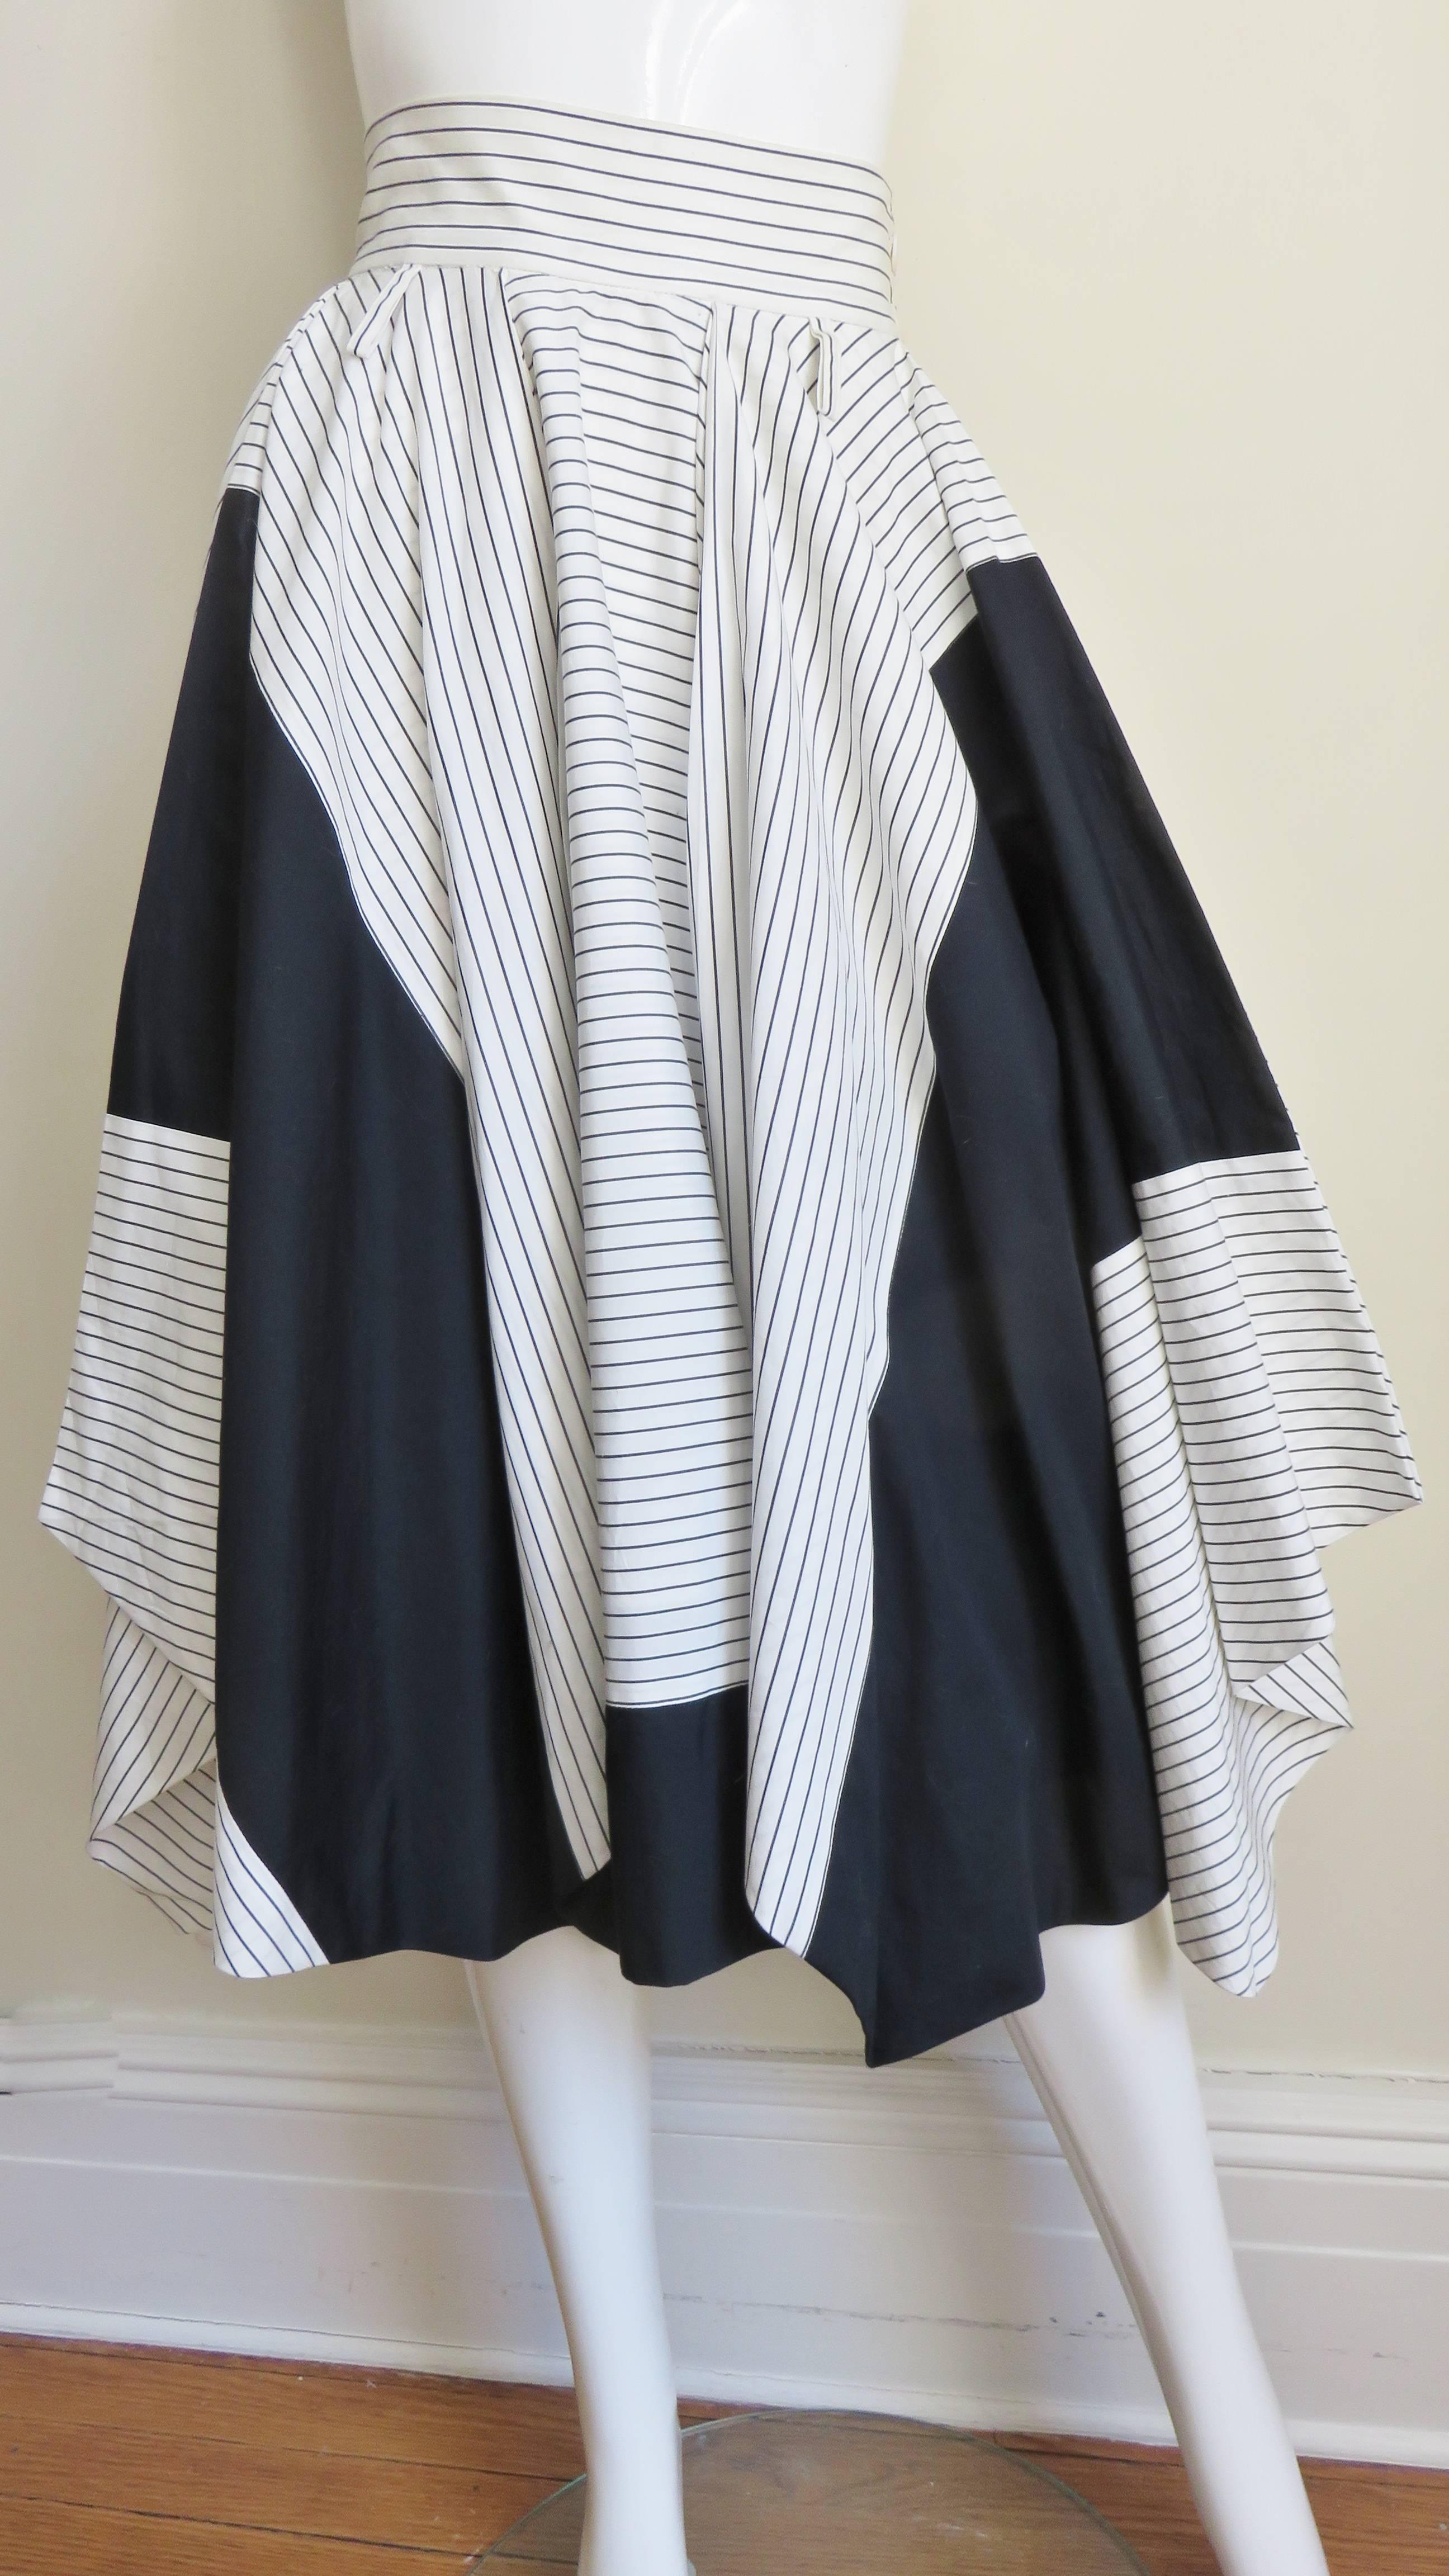 A fabulous black and white with black stripes cotton skirt from Issey Miyake.  It has a waistband and black inset panels in the white striped portion of the full skirt. It buttons at the side waist, has side seam pockets and is fully lined.   
Fits